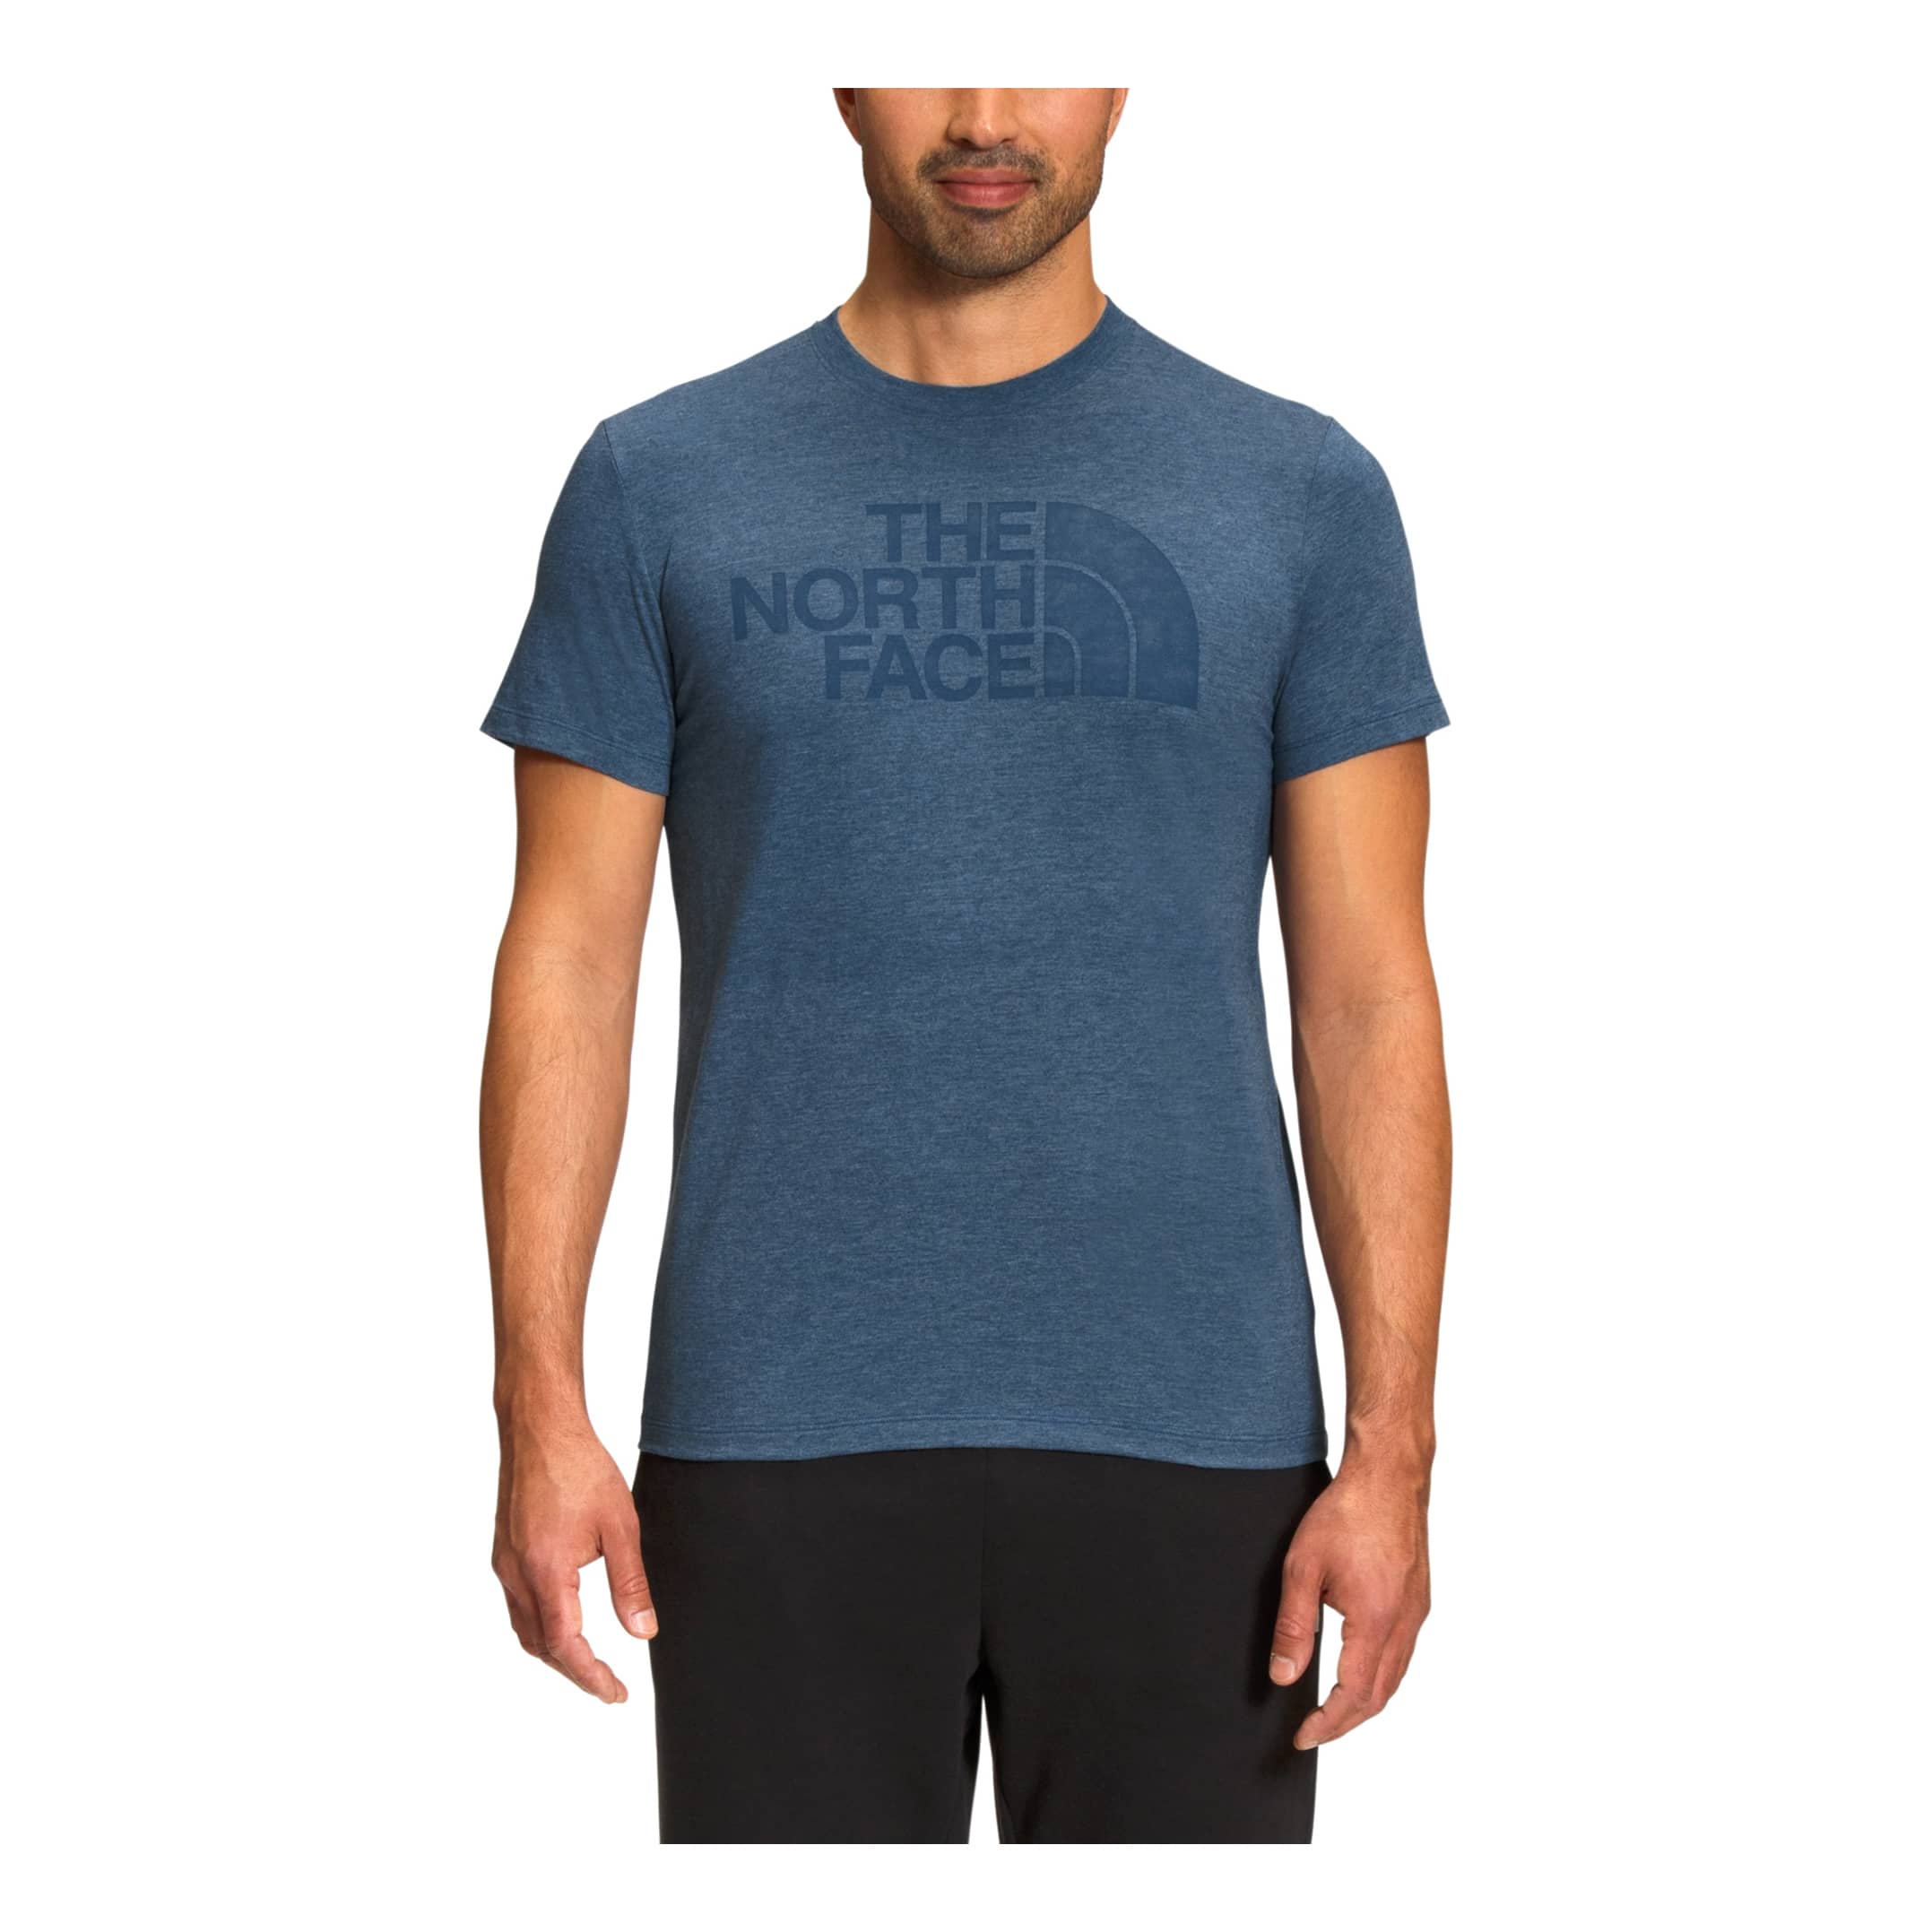 The North Face® Men's Half Dome Tri-Blend Short-Sleeve T-Shirt